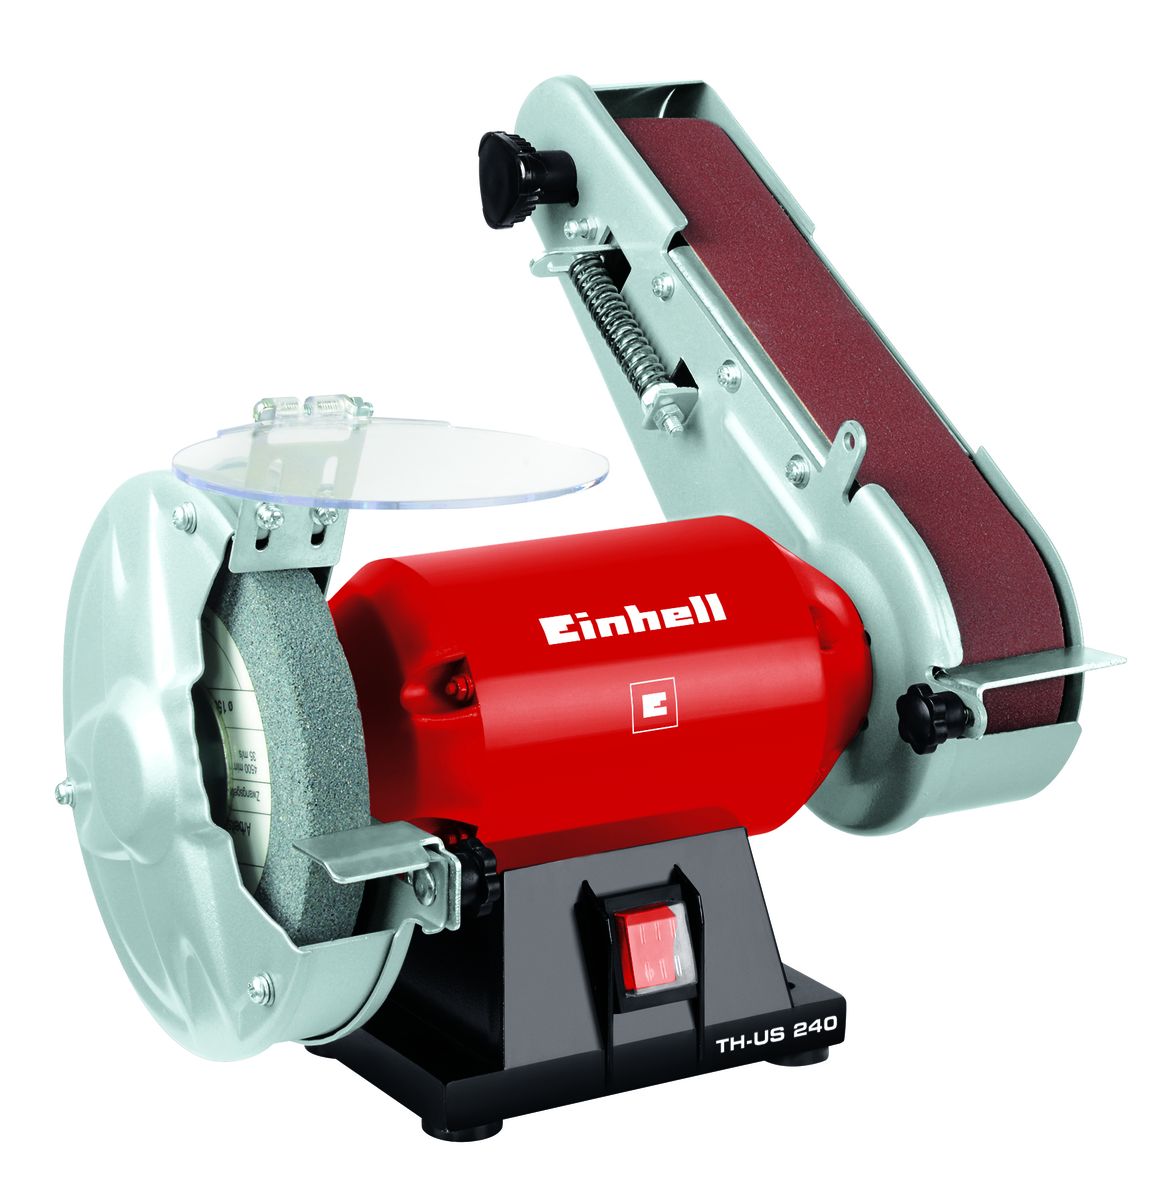 EINHELL -Grinder Bench and Belt 150mm - TH-US 240 | Buy Online in South .